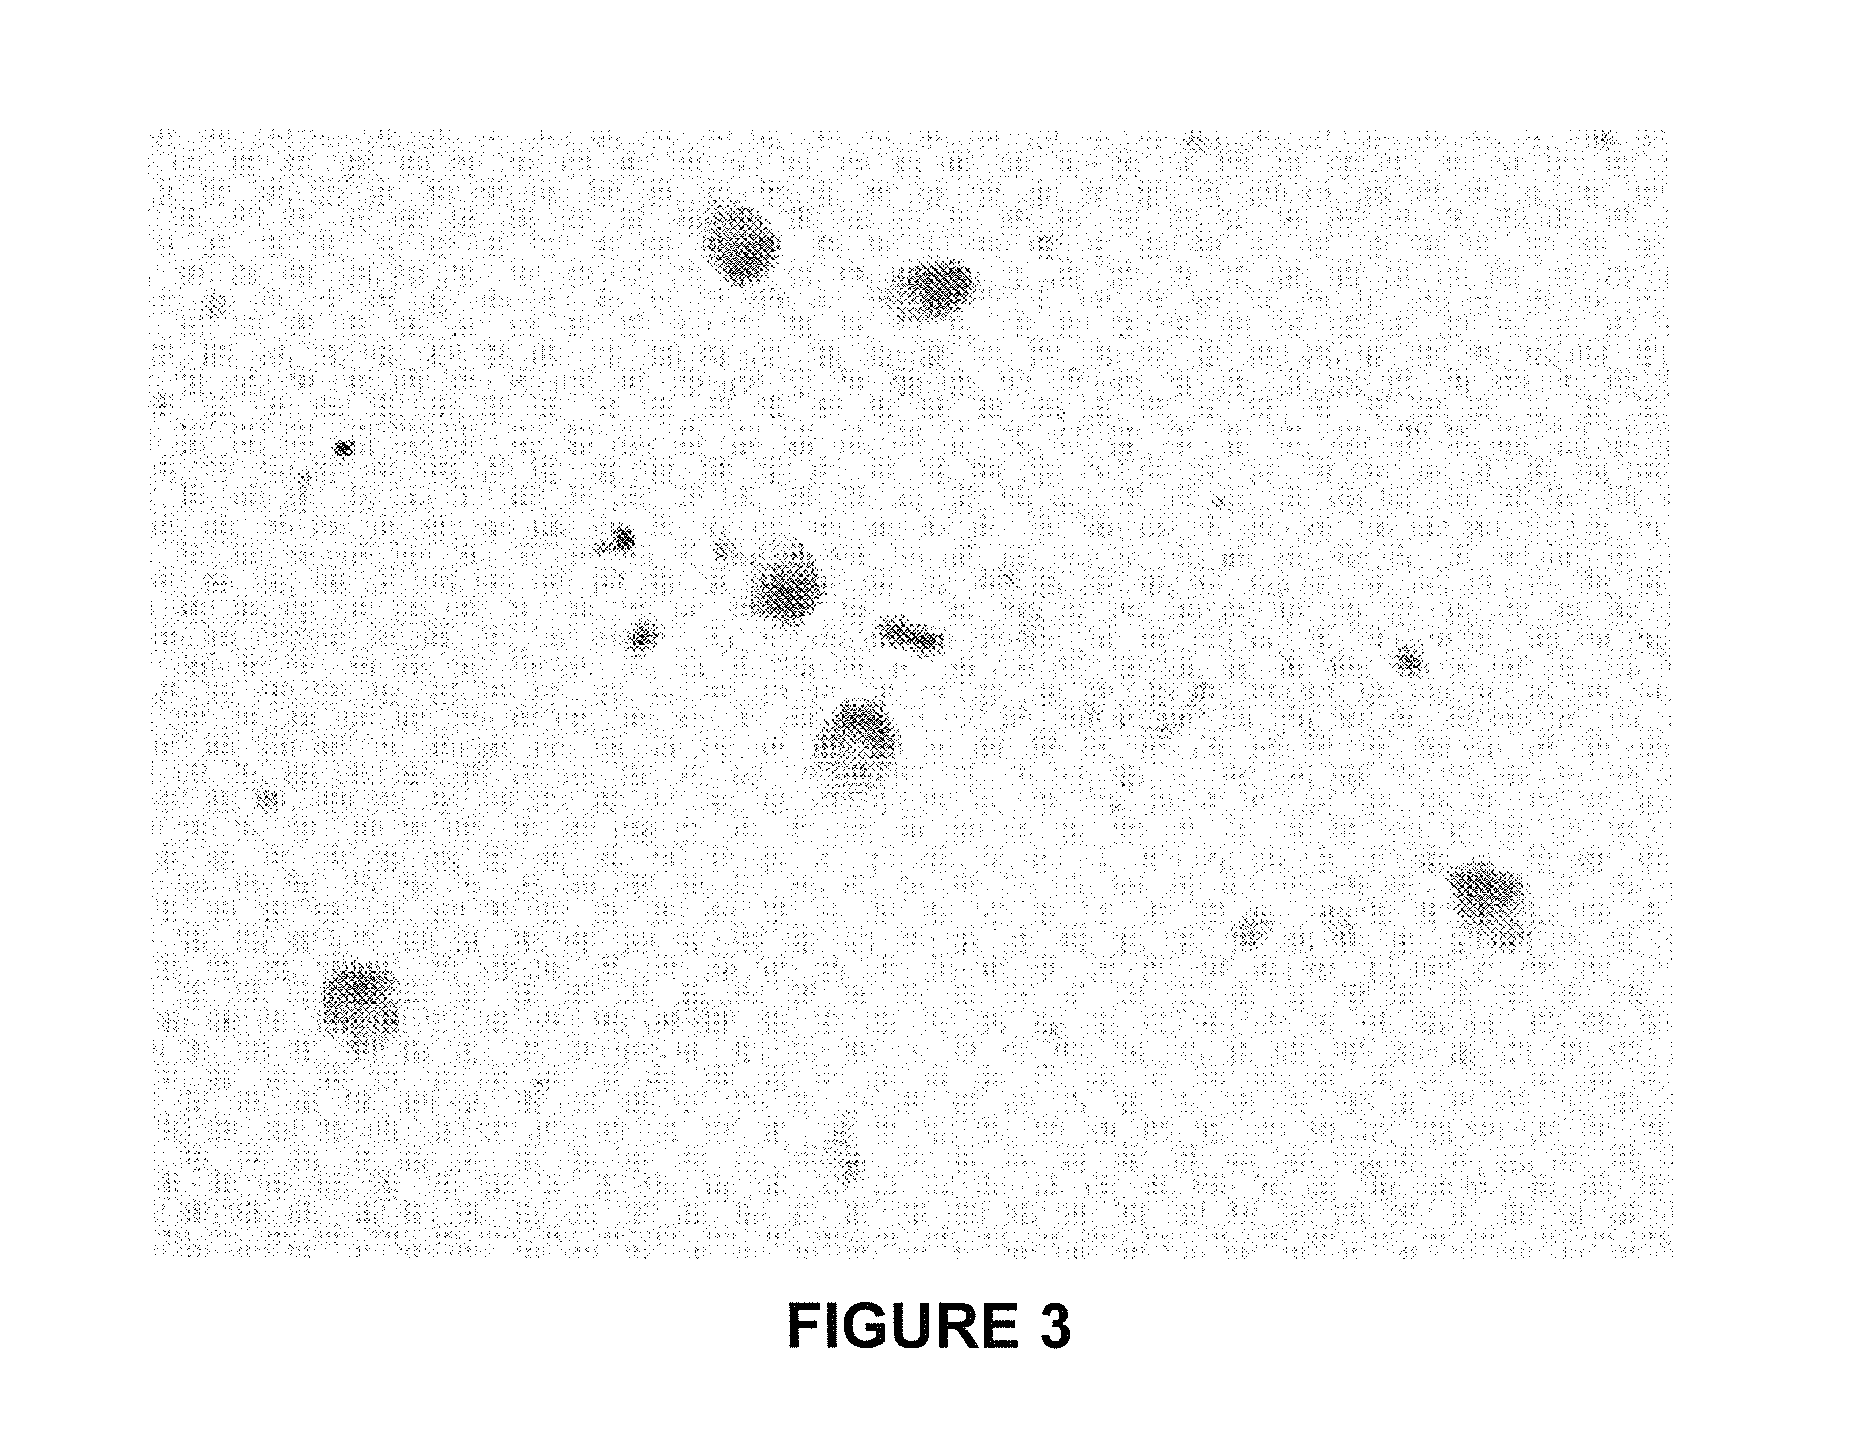 Method For Determining The Production Of Reactive Oxygen Species In A Cellular Population